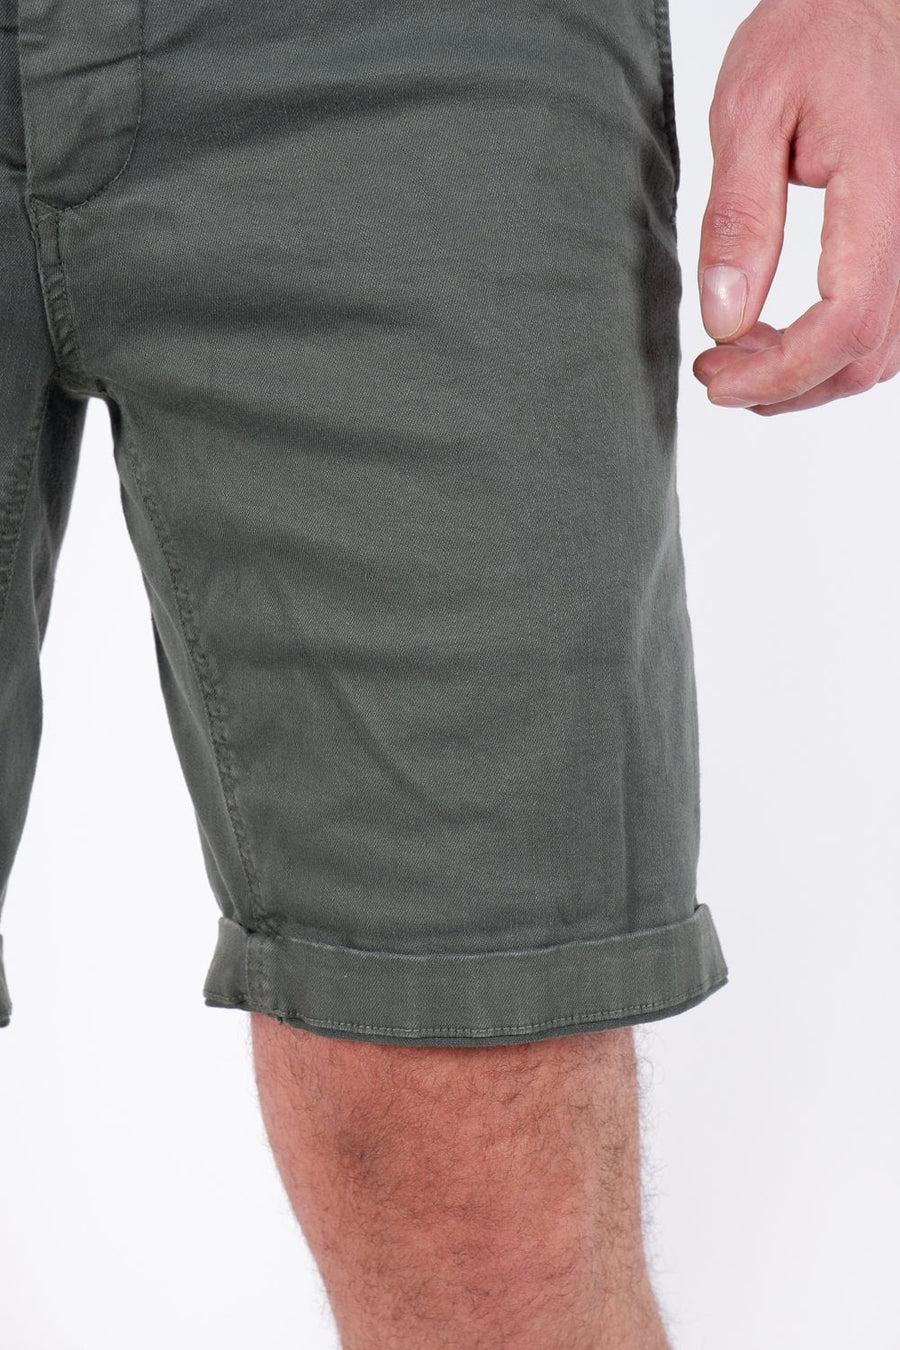 Buy the Replay Hyperflex X-L.I.T.E.Benni Short in Khaki at Intro. Spend £50 for free UK delivery. Official stockists. We ship worldwide.